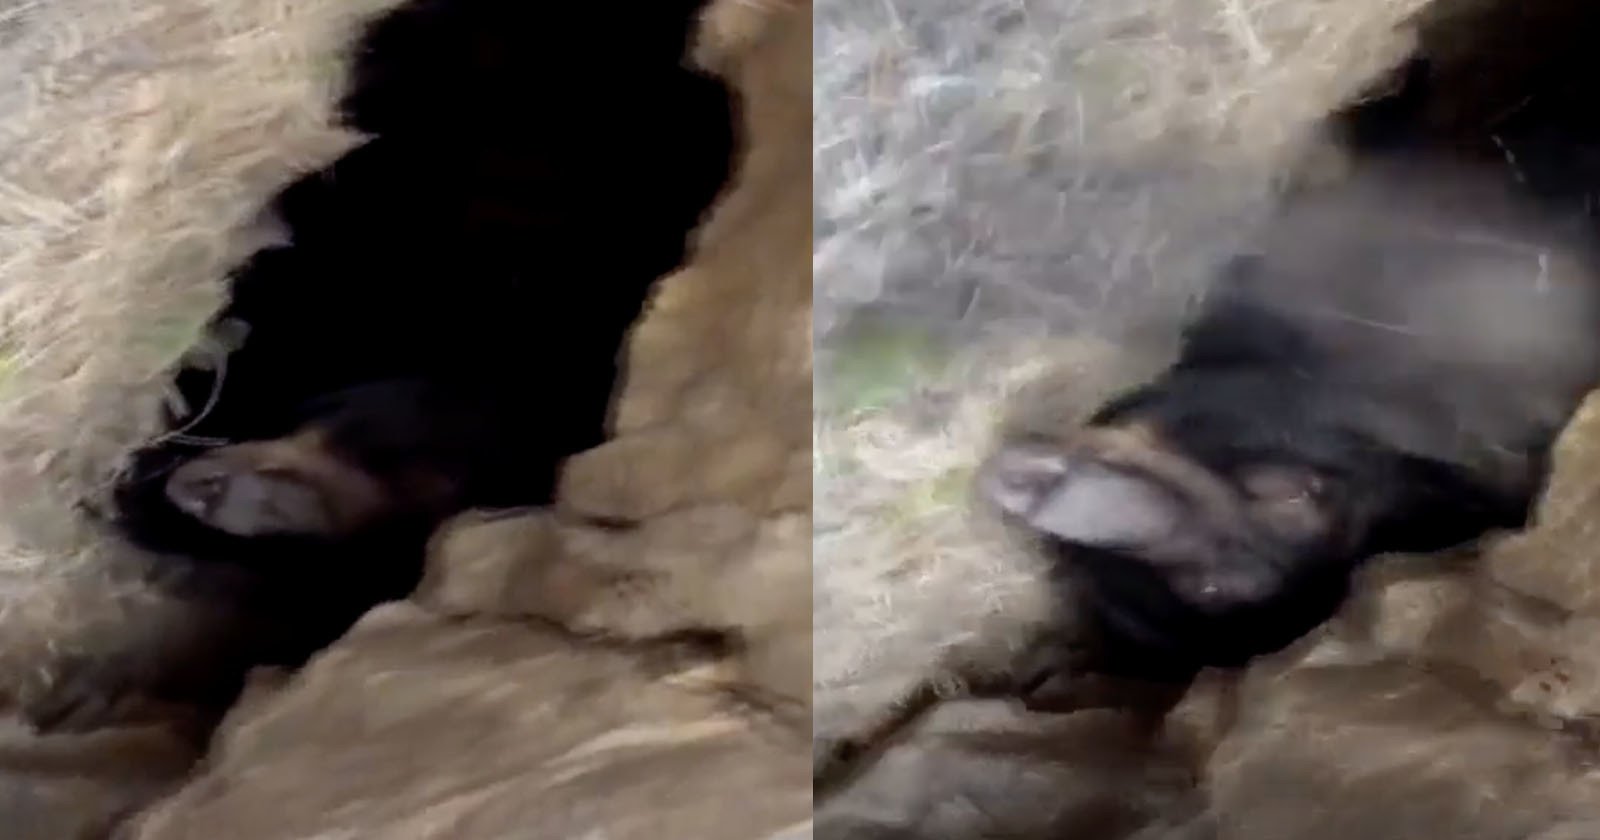 Influencer Sparks Controversy After Trying to Photograph a Bear in its Den